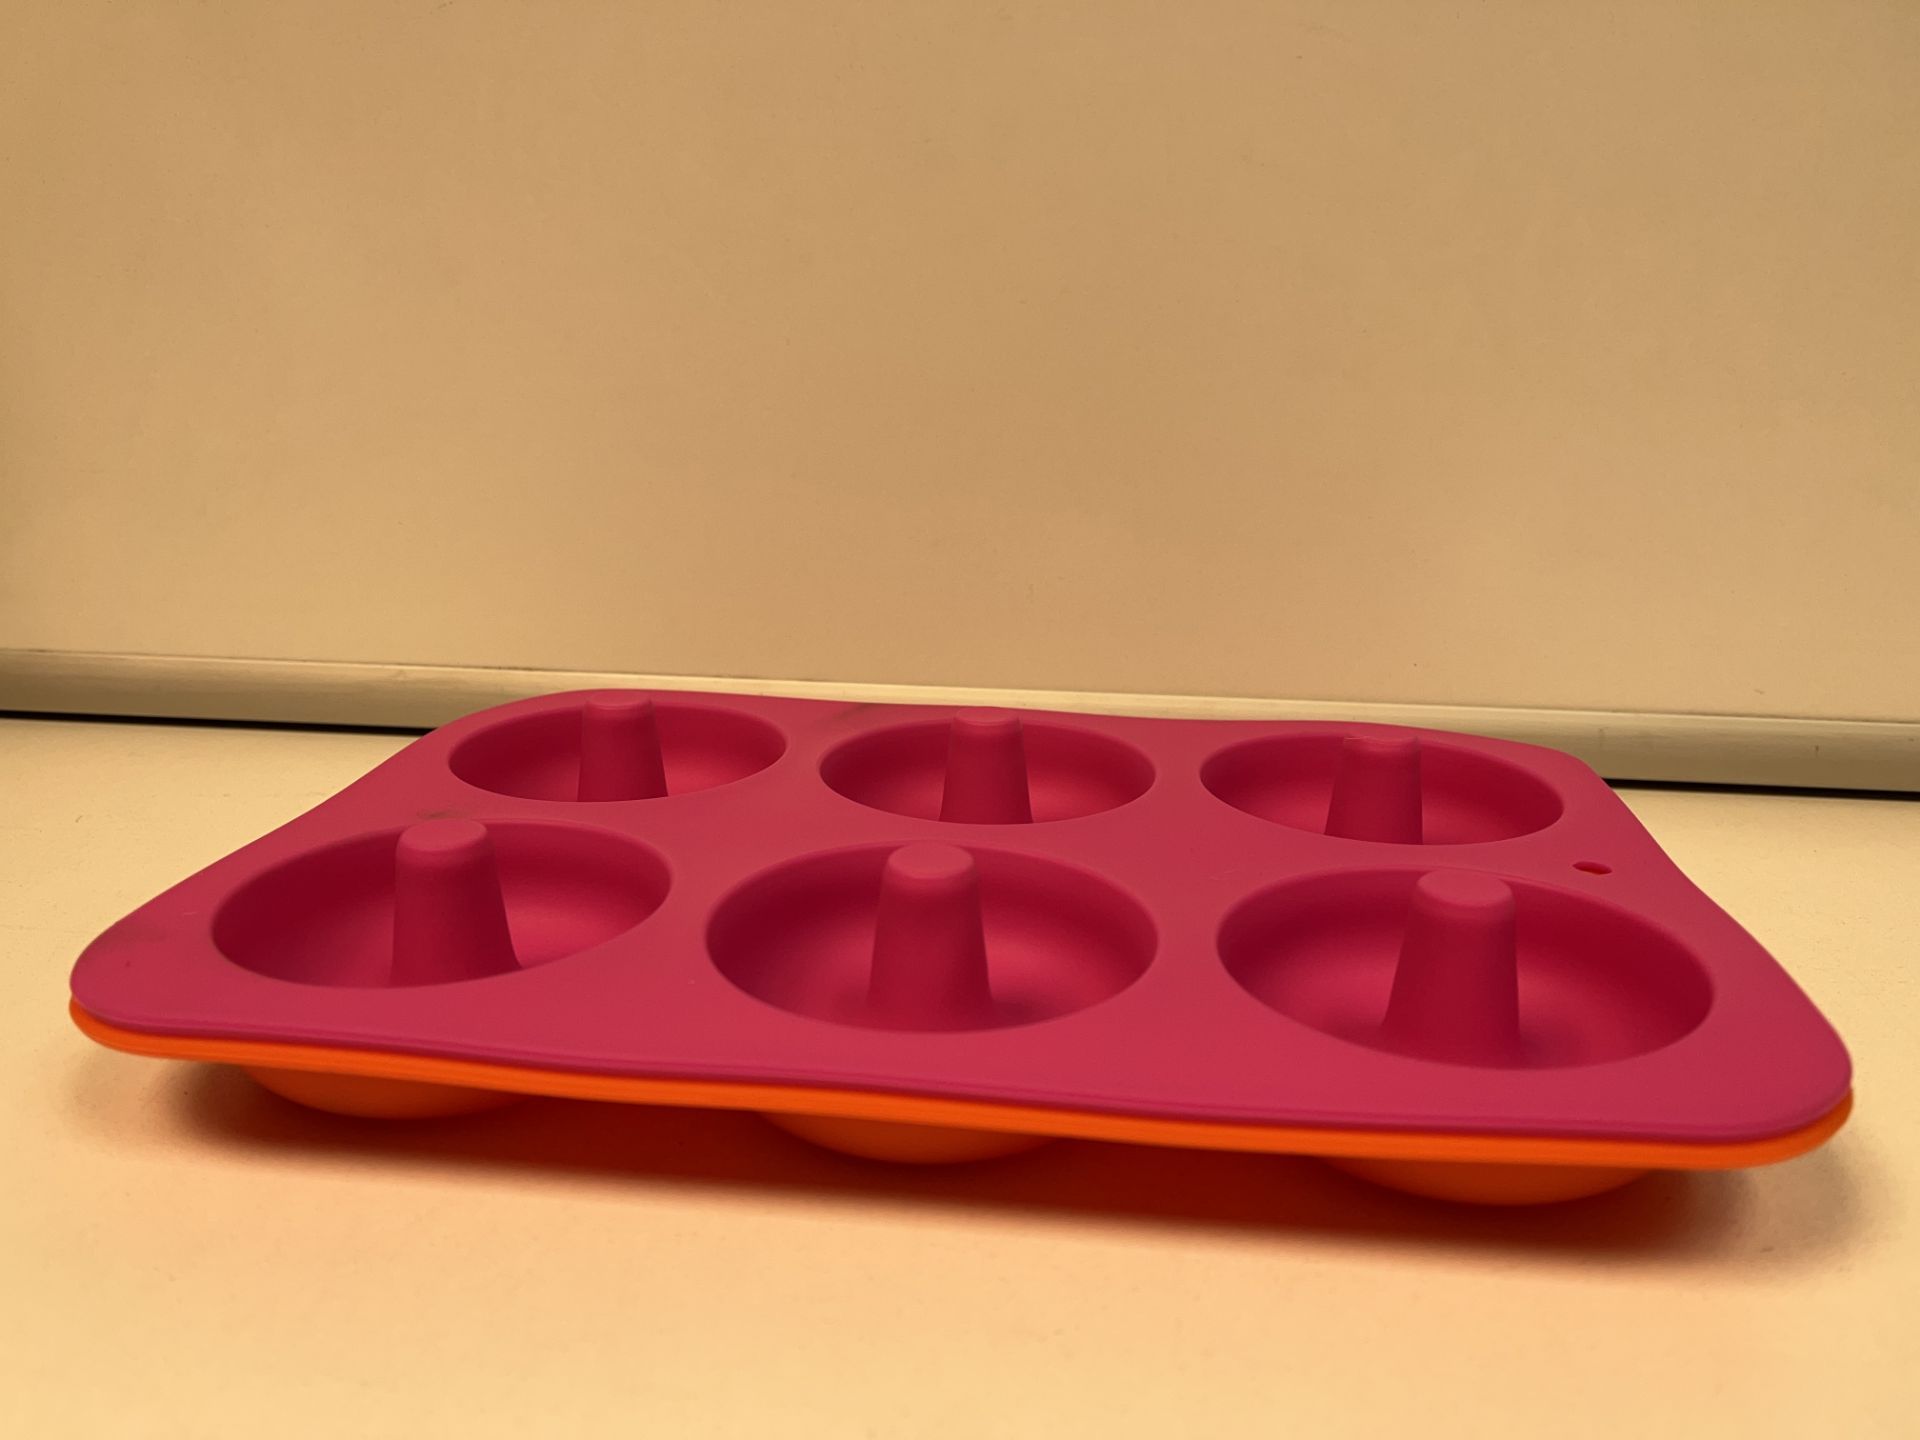 40 X BRAND NEW 6 CONNECTED SILICONE DOUGHNUT MOULDS FOR COOKING R19